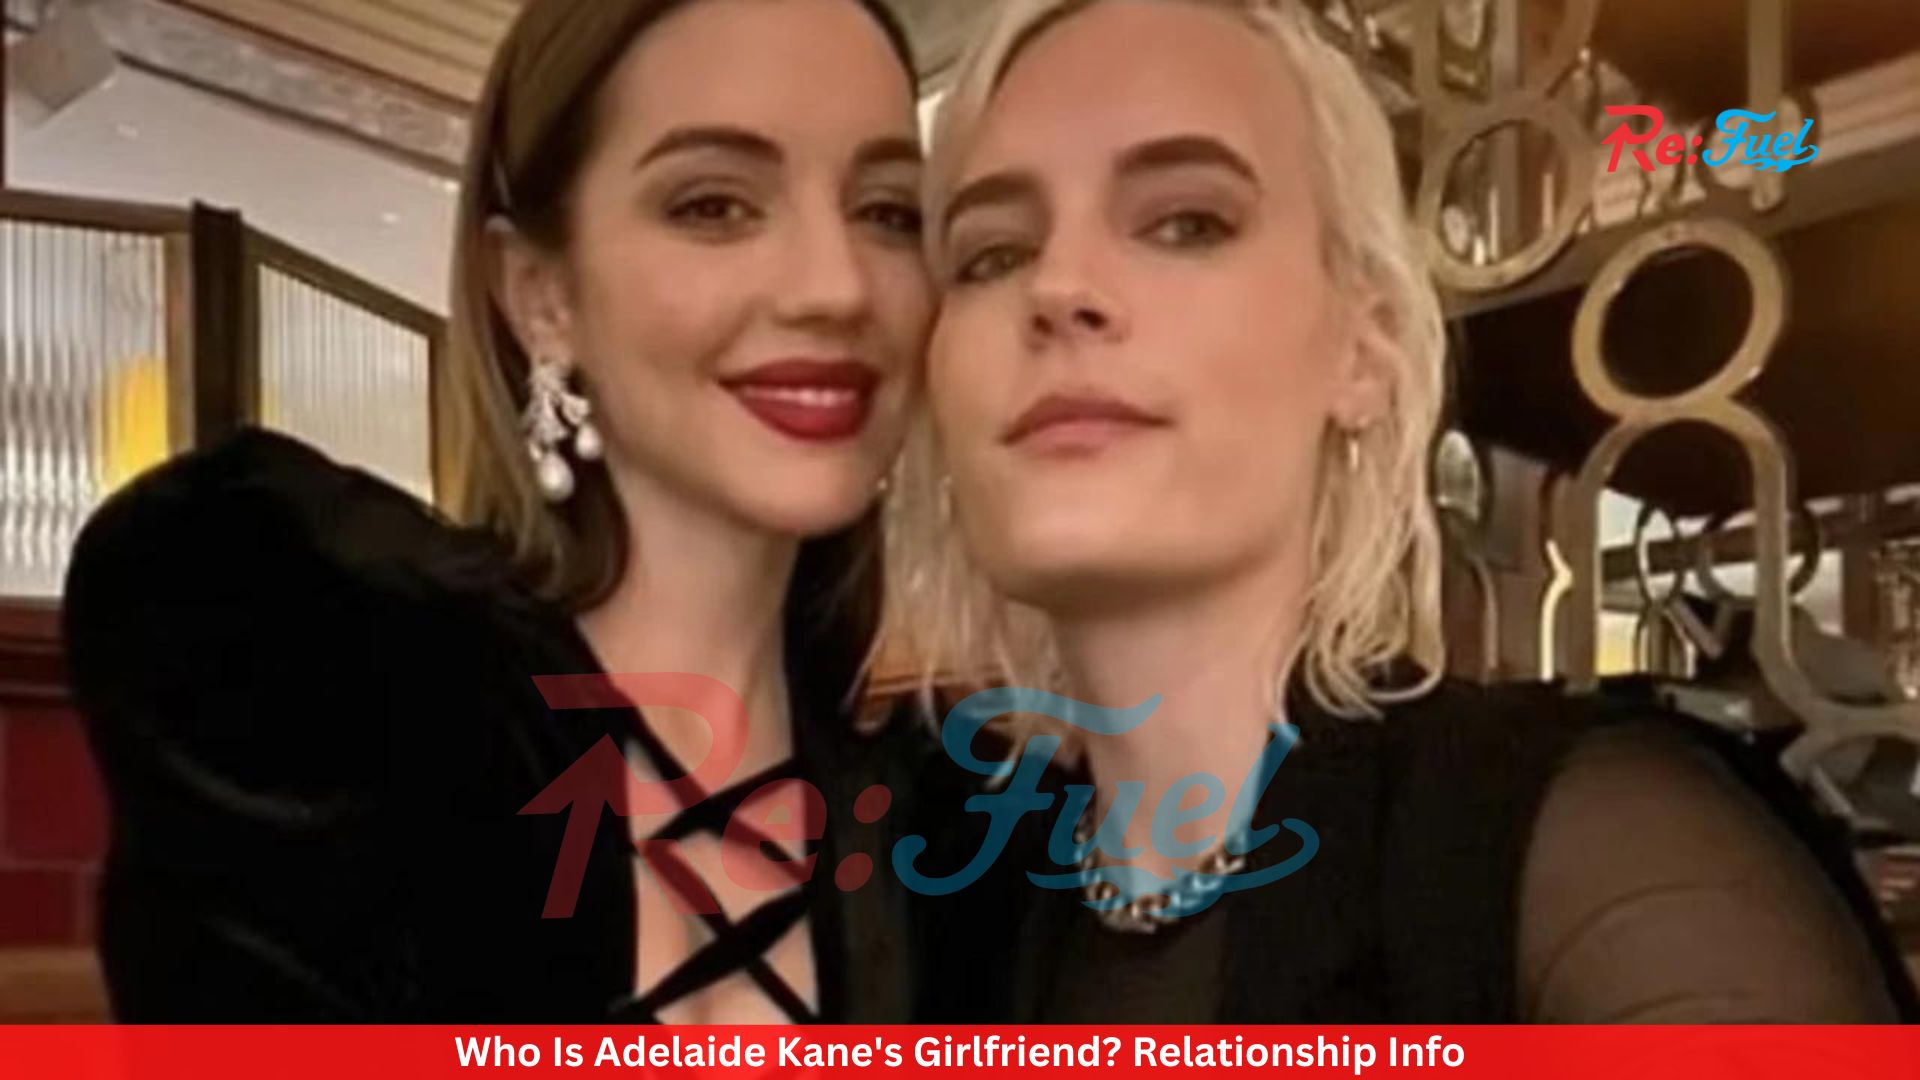 Who Is Adelaide Kane's Girlfriend? Relationship Info